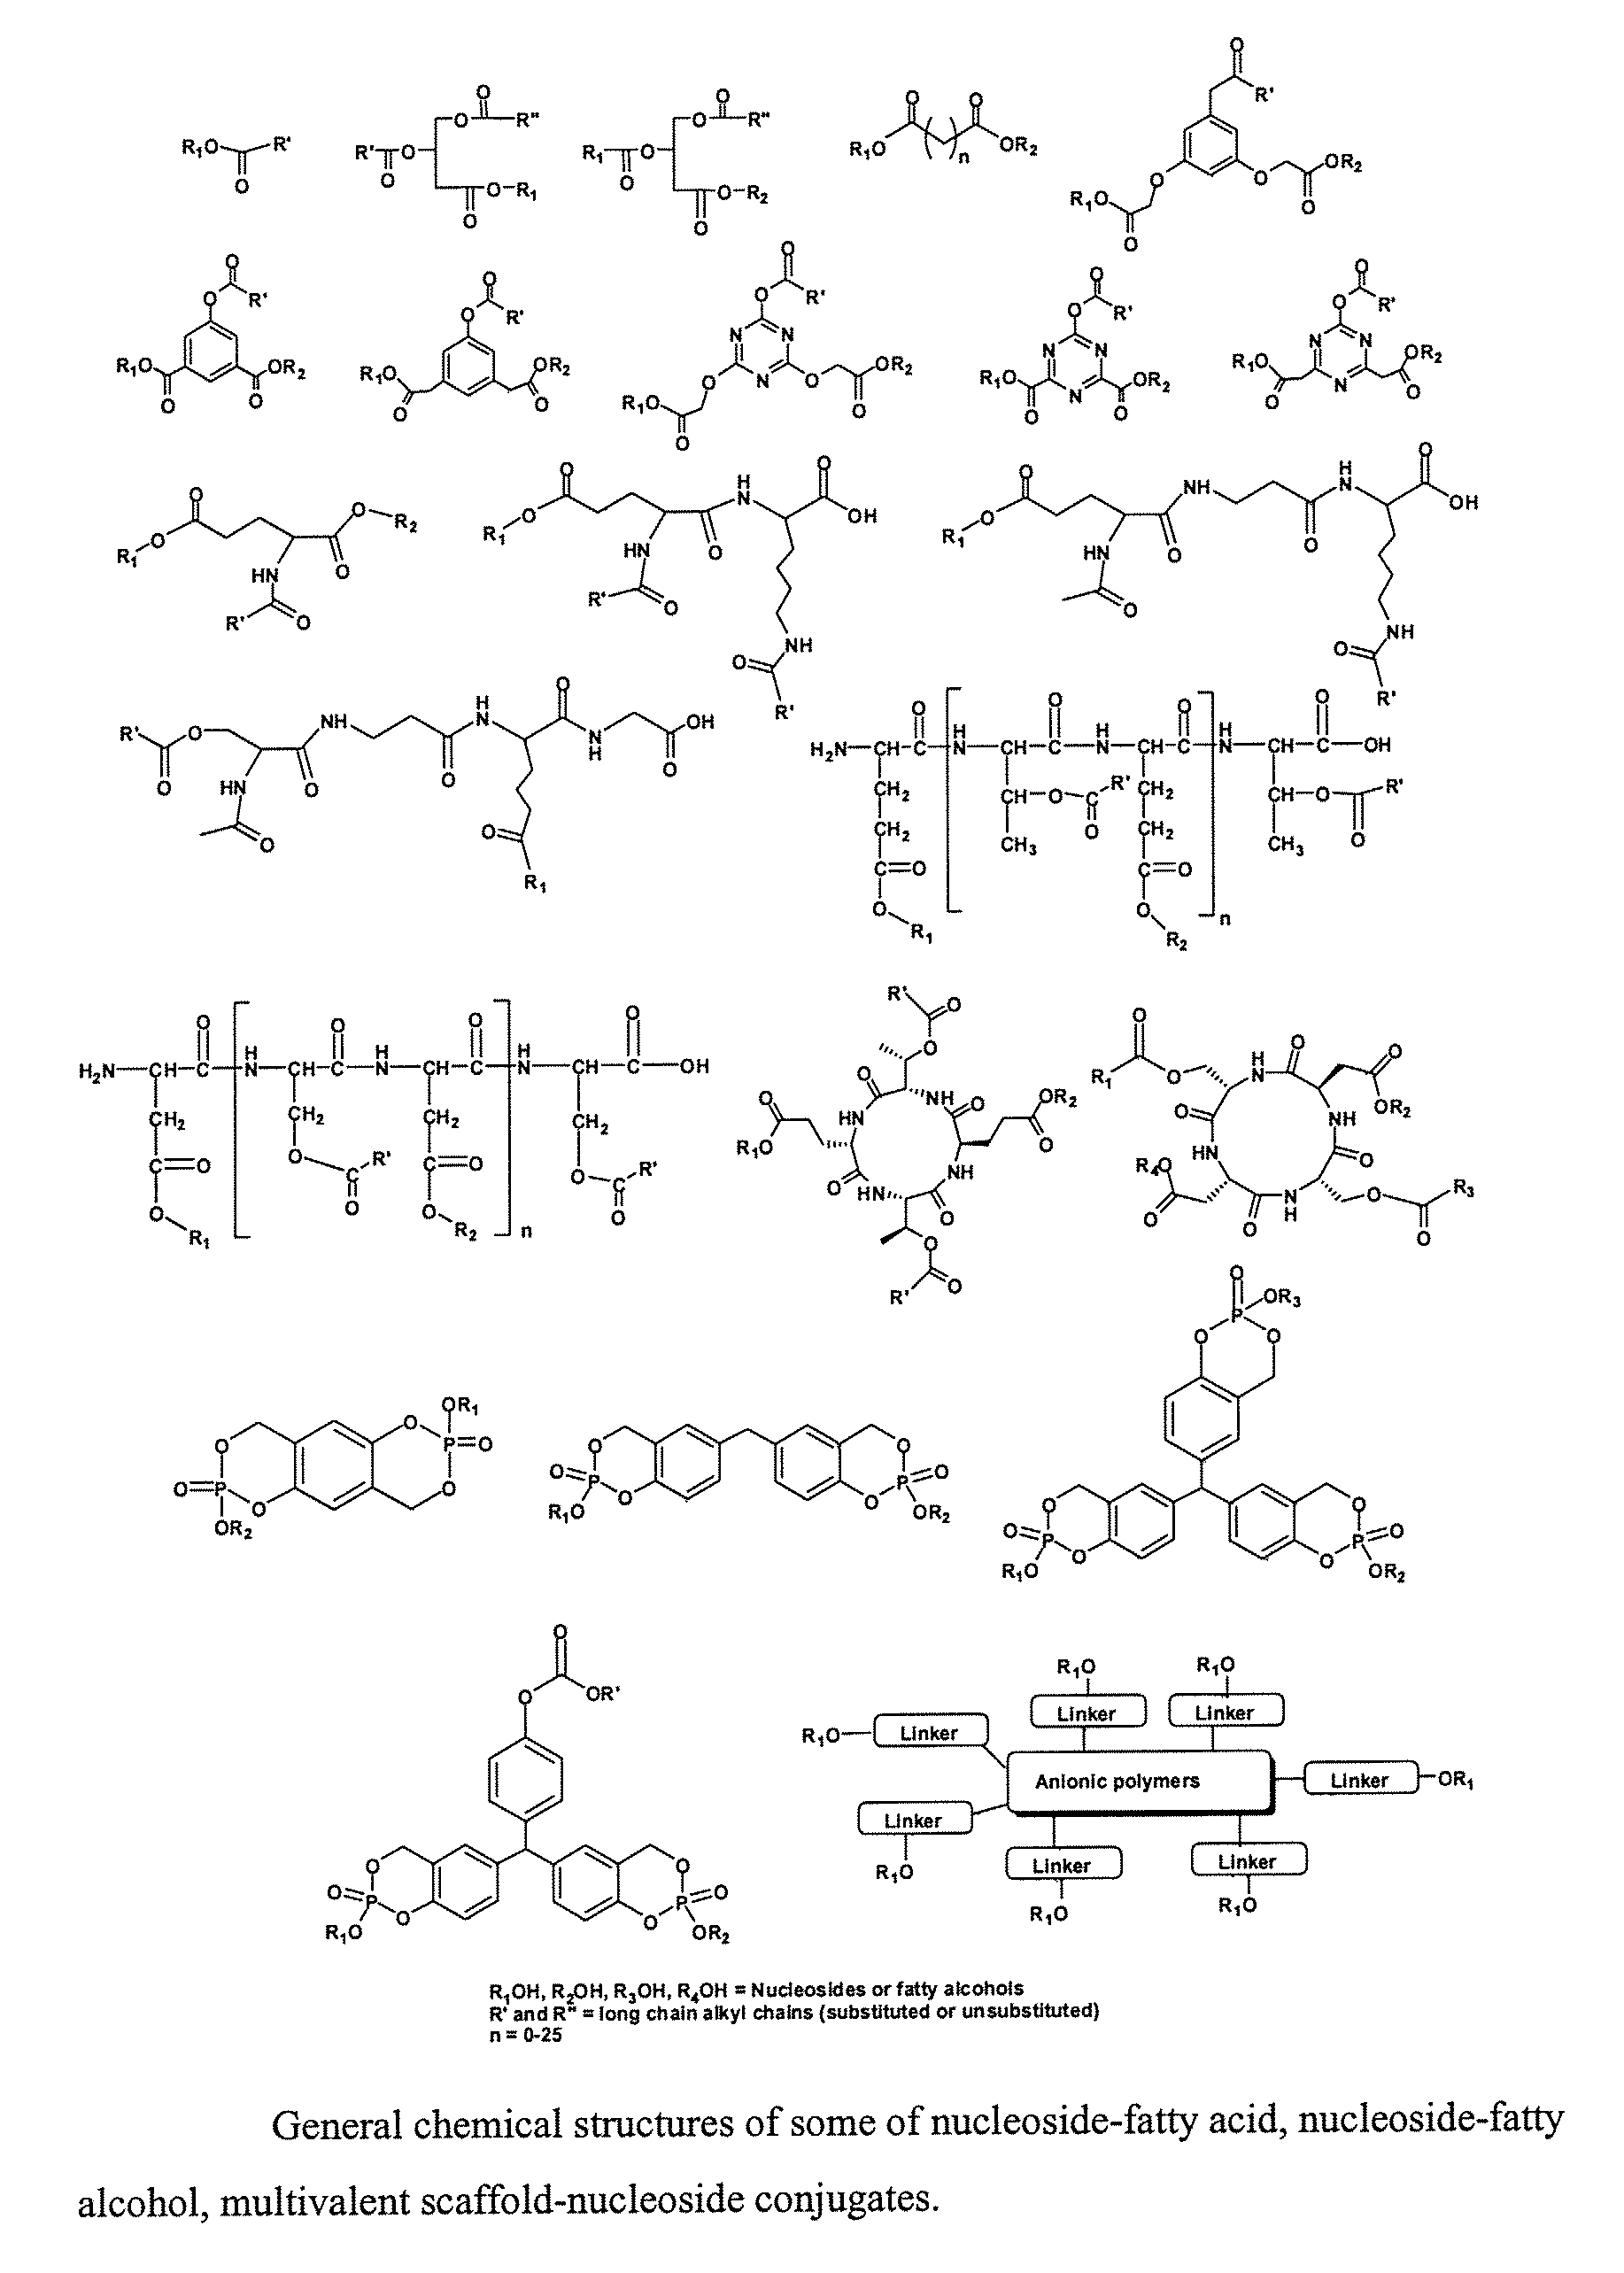 Substituted nucleoside derivatives with antiviral and antimicrobial properties